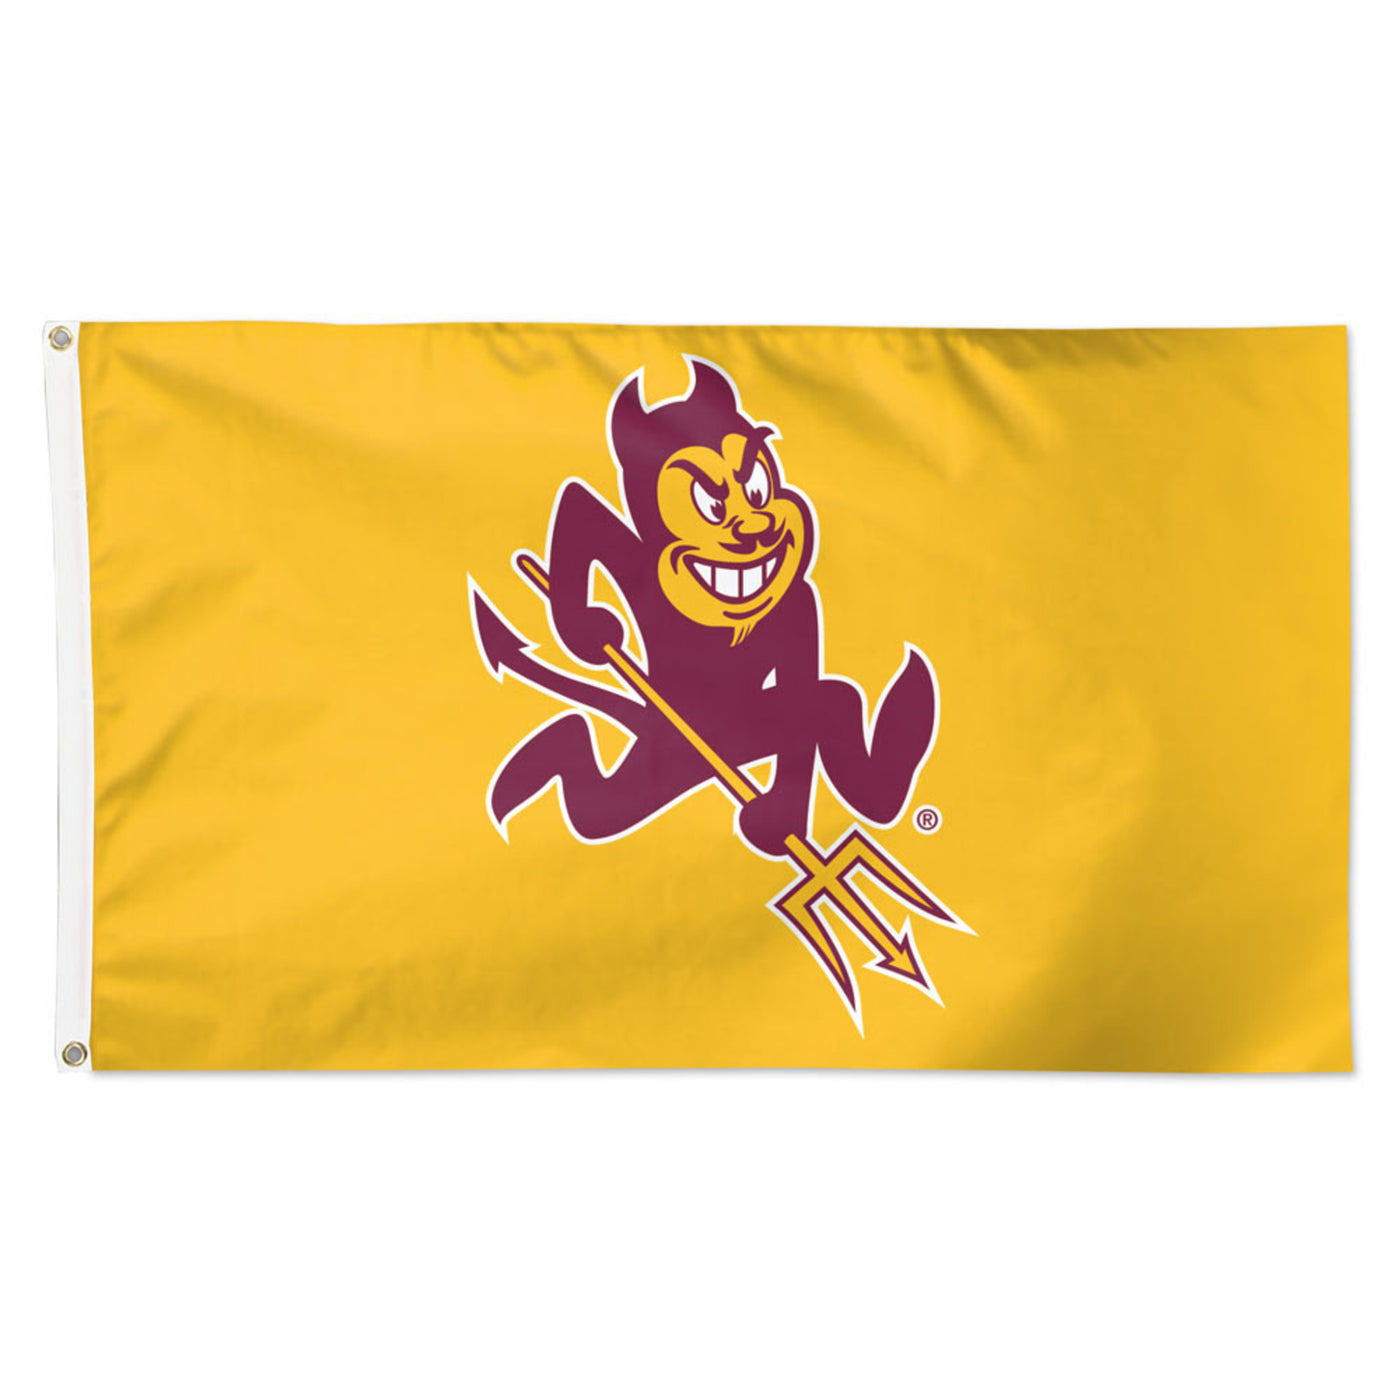 ASU gold flag with maroon and gold sparky logo outlined in white. 